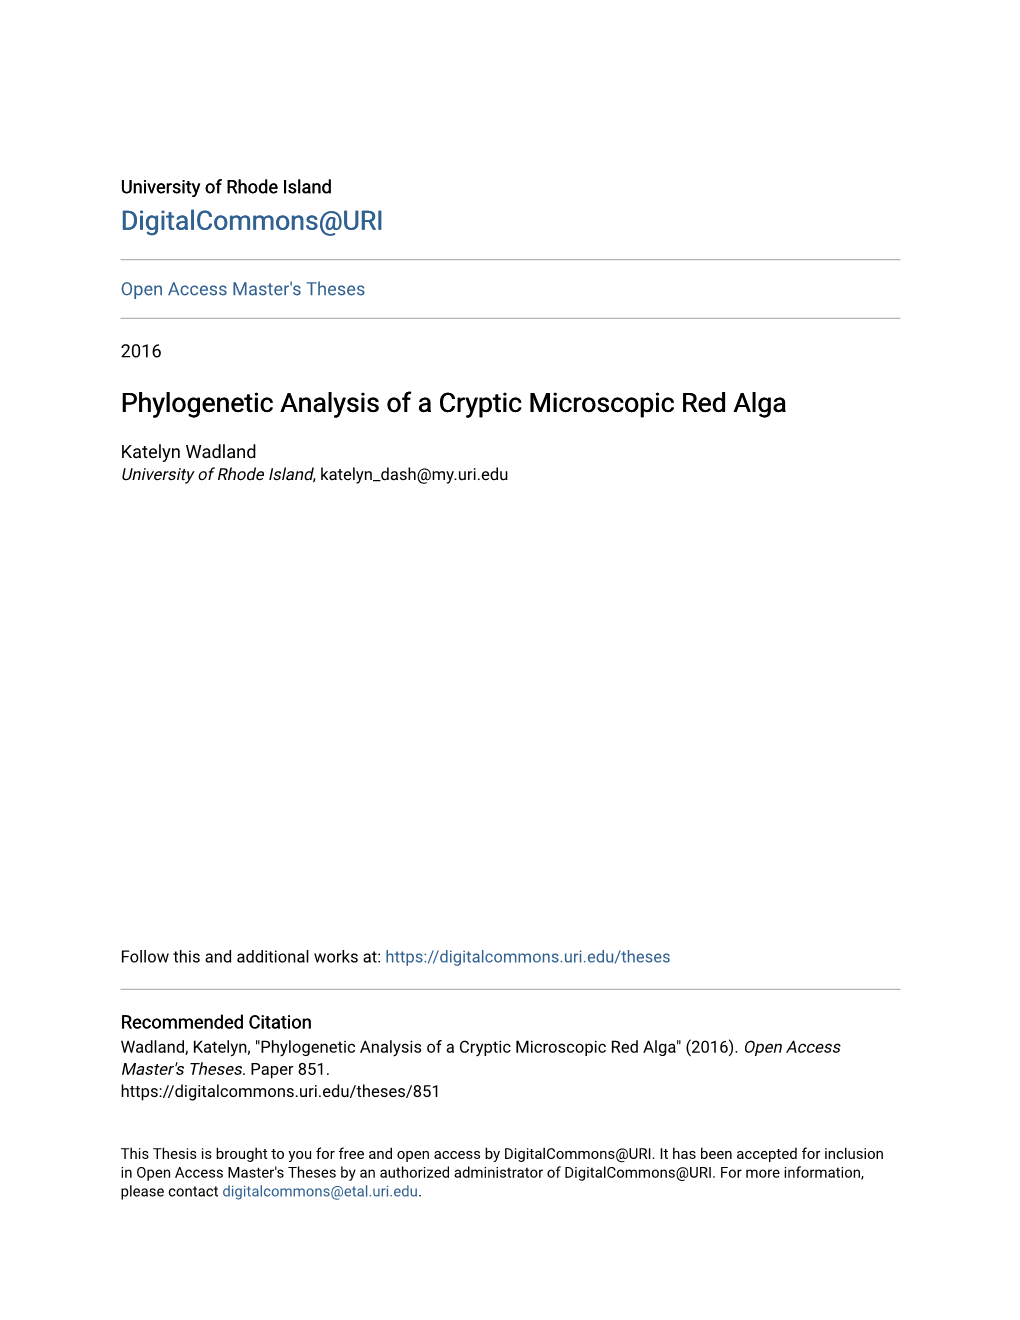 Phylogenetic Analysis of a Cryptic Microscopic Red Alga